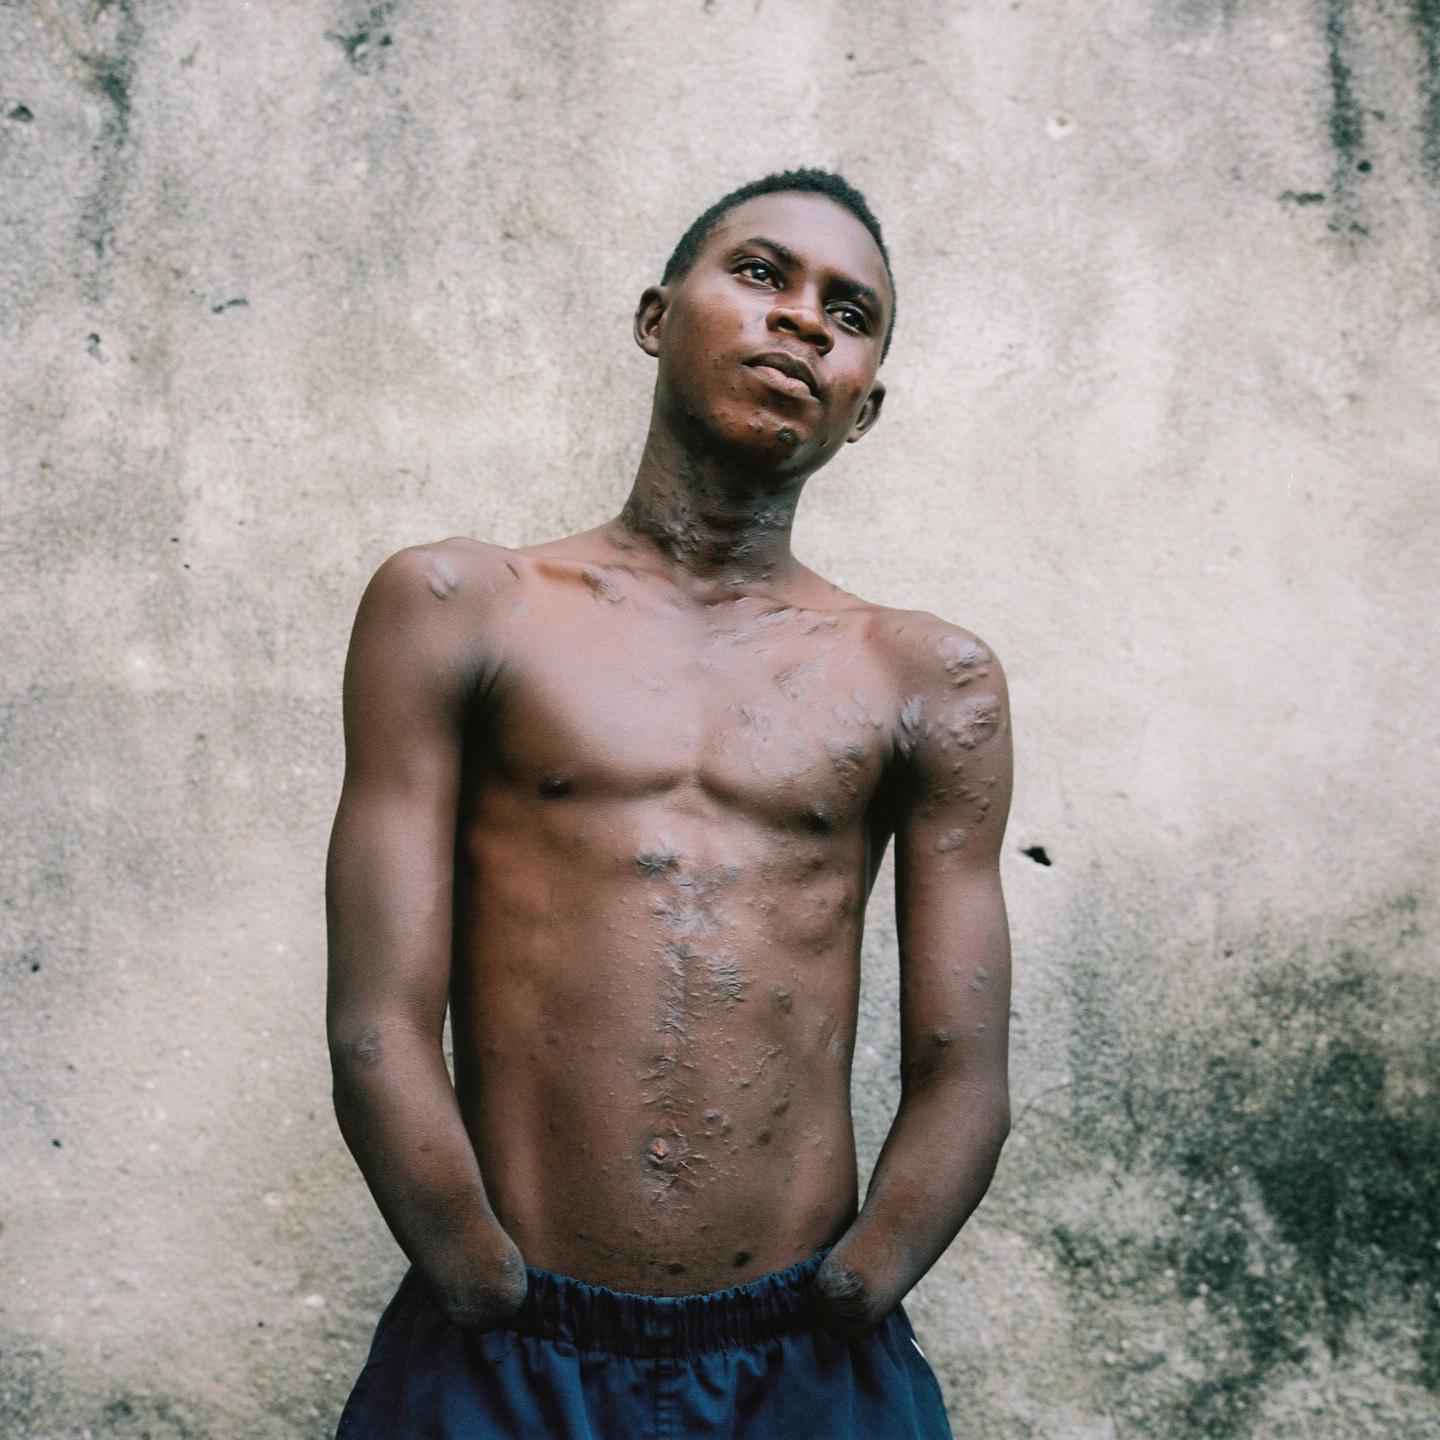 T&eacute;moin Yego Alphonse, 25 years old. Abidjan. Alphonse was 17 years old when he lost both his hands to a granade explosion. He was...